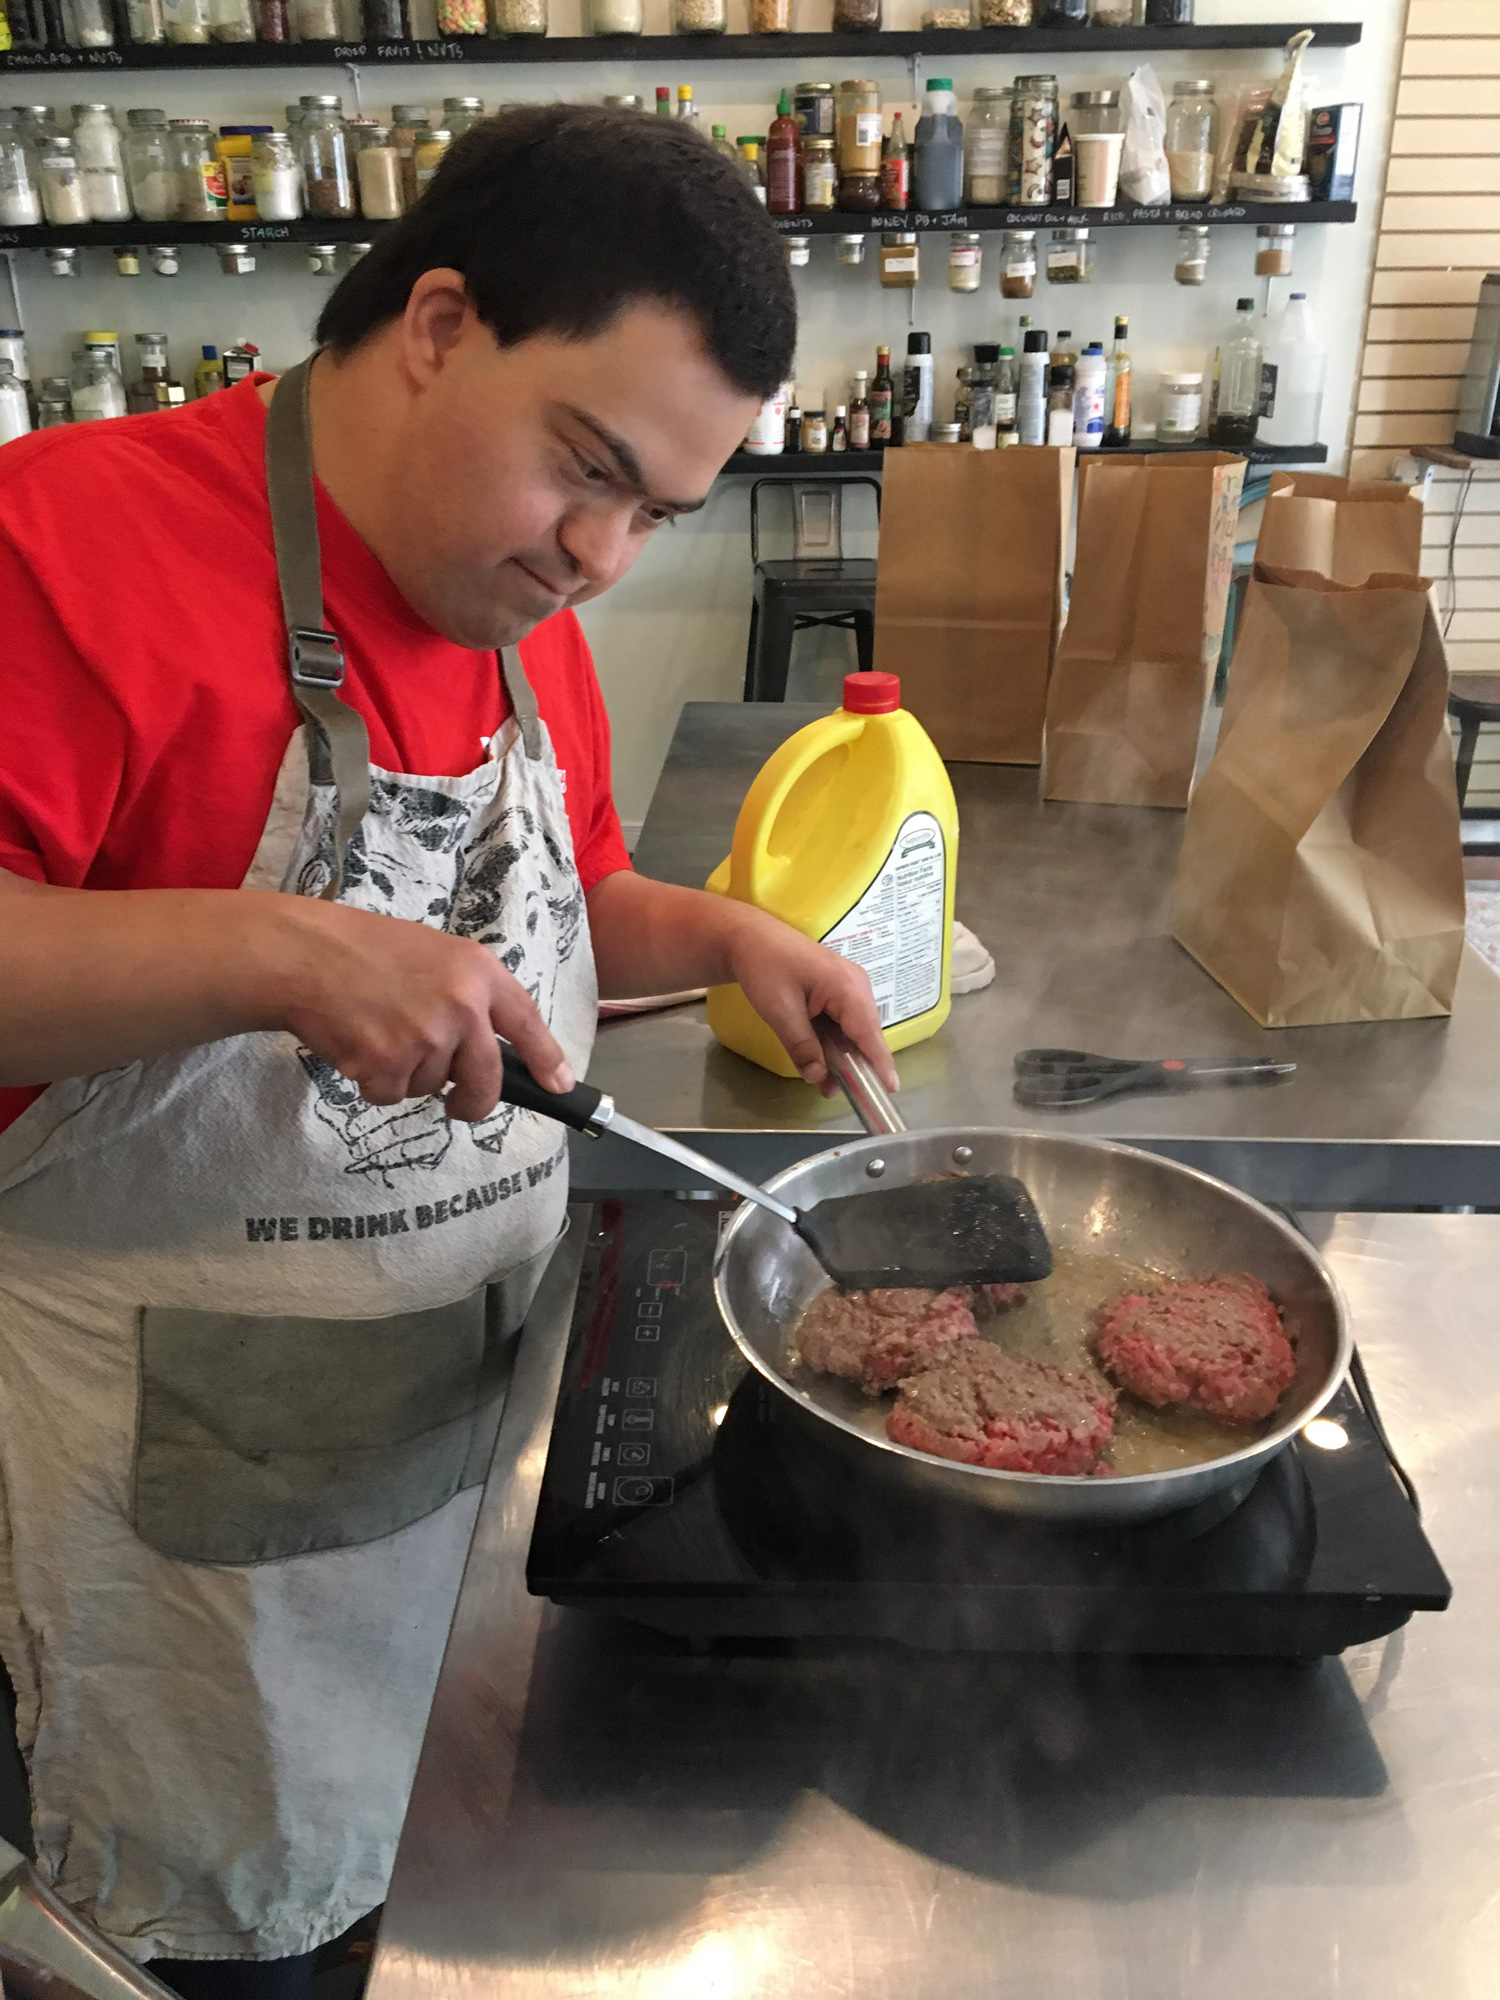 Hands on cooking classes for adults and teens with Down syndrome, Mild Intellectual Disability and Autism.